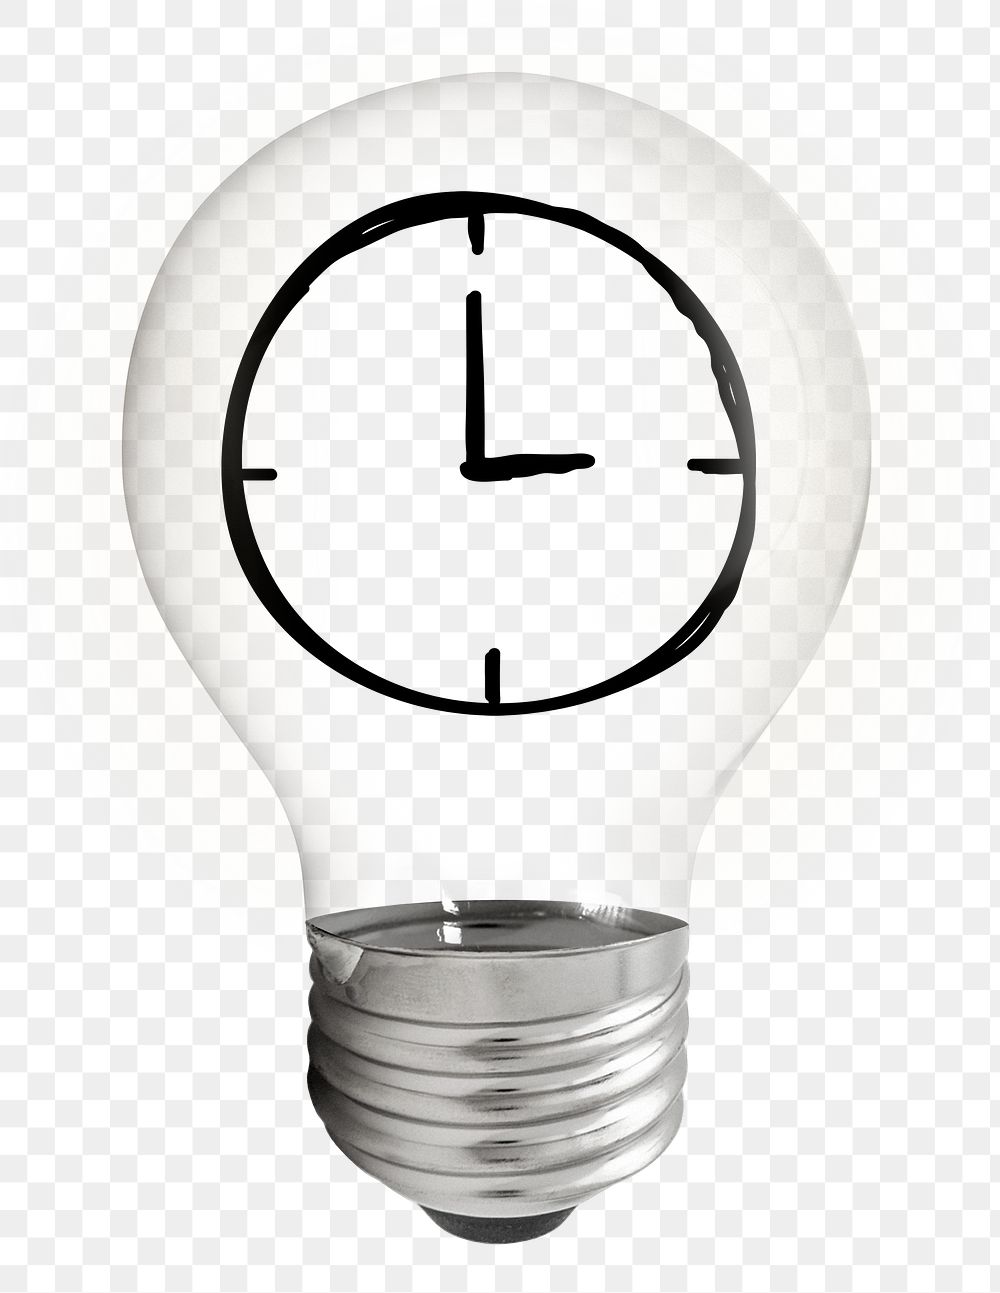 Clock doodle png icon light bulb sticker, business symbol graphic on transparent background